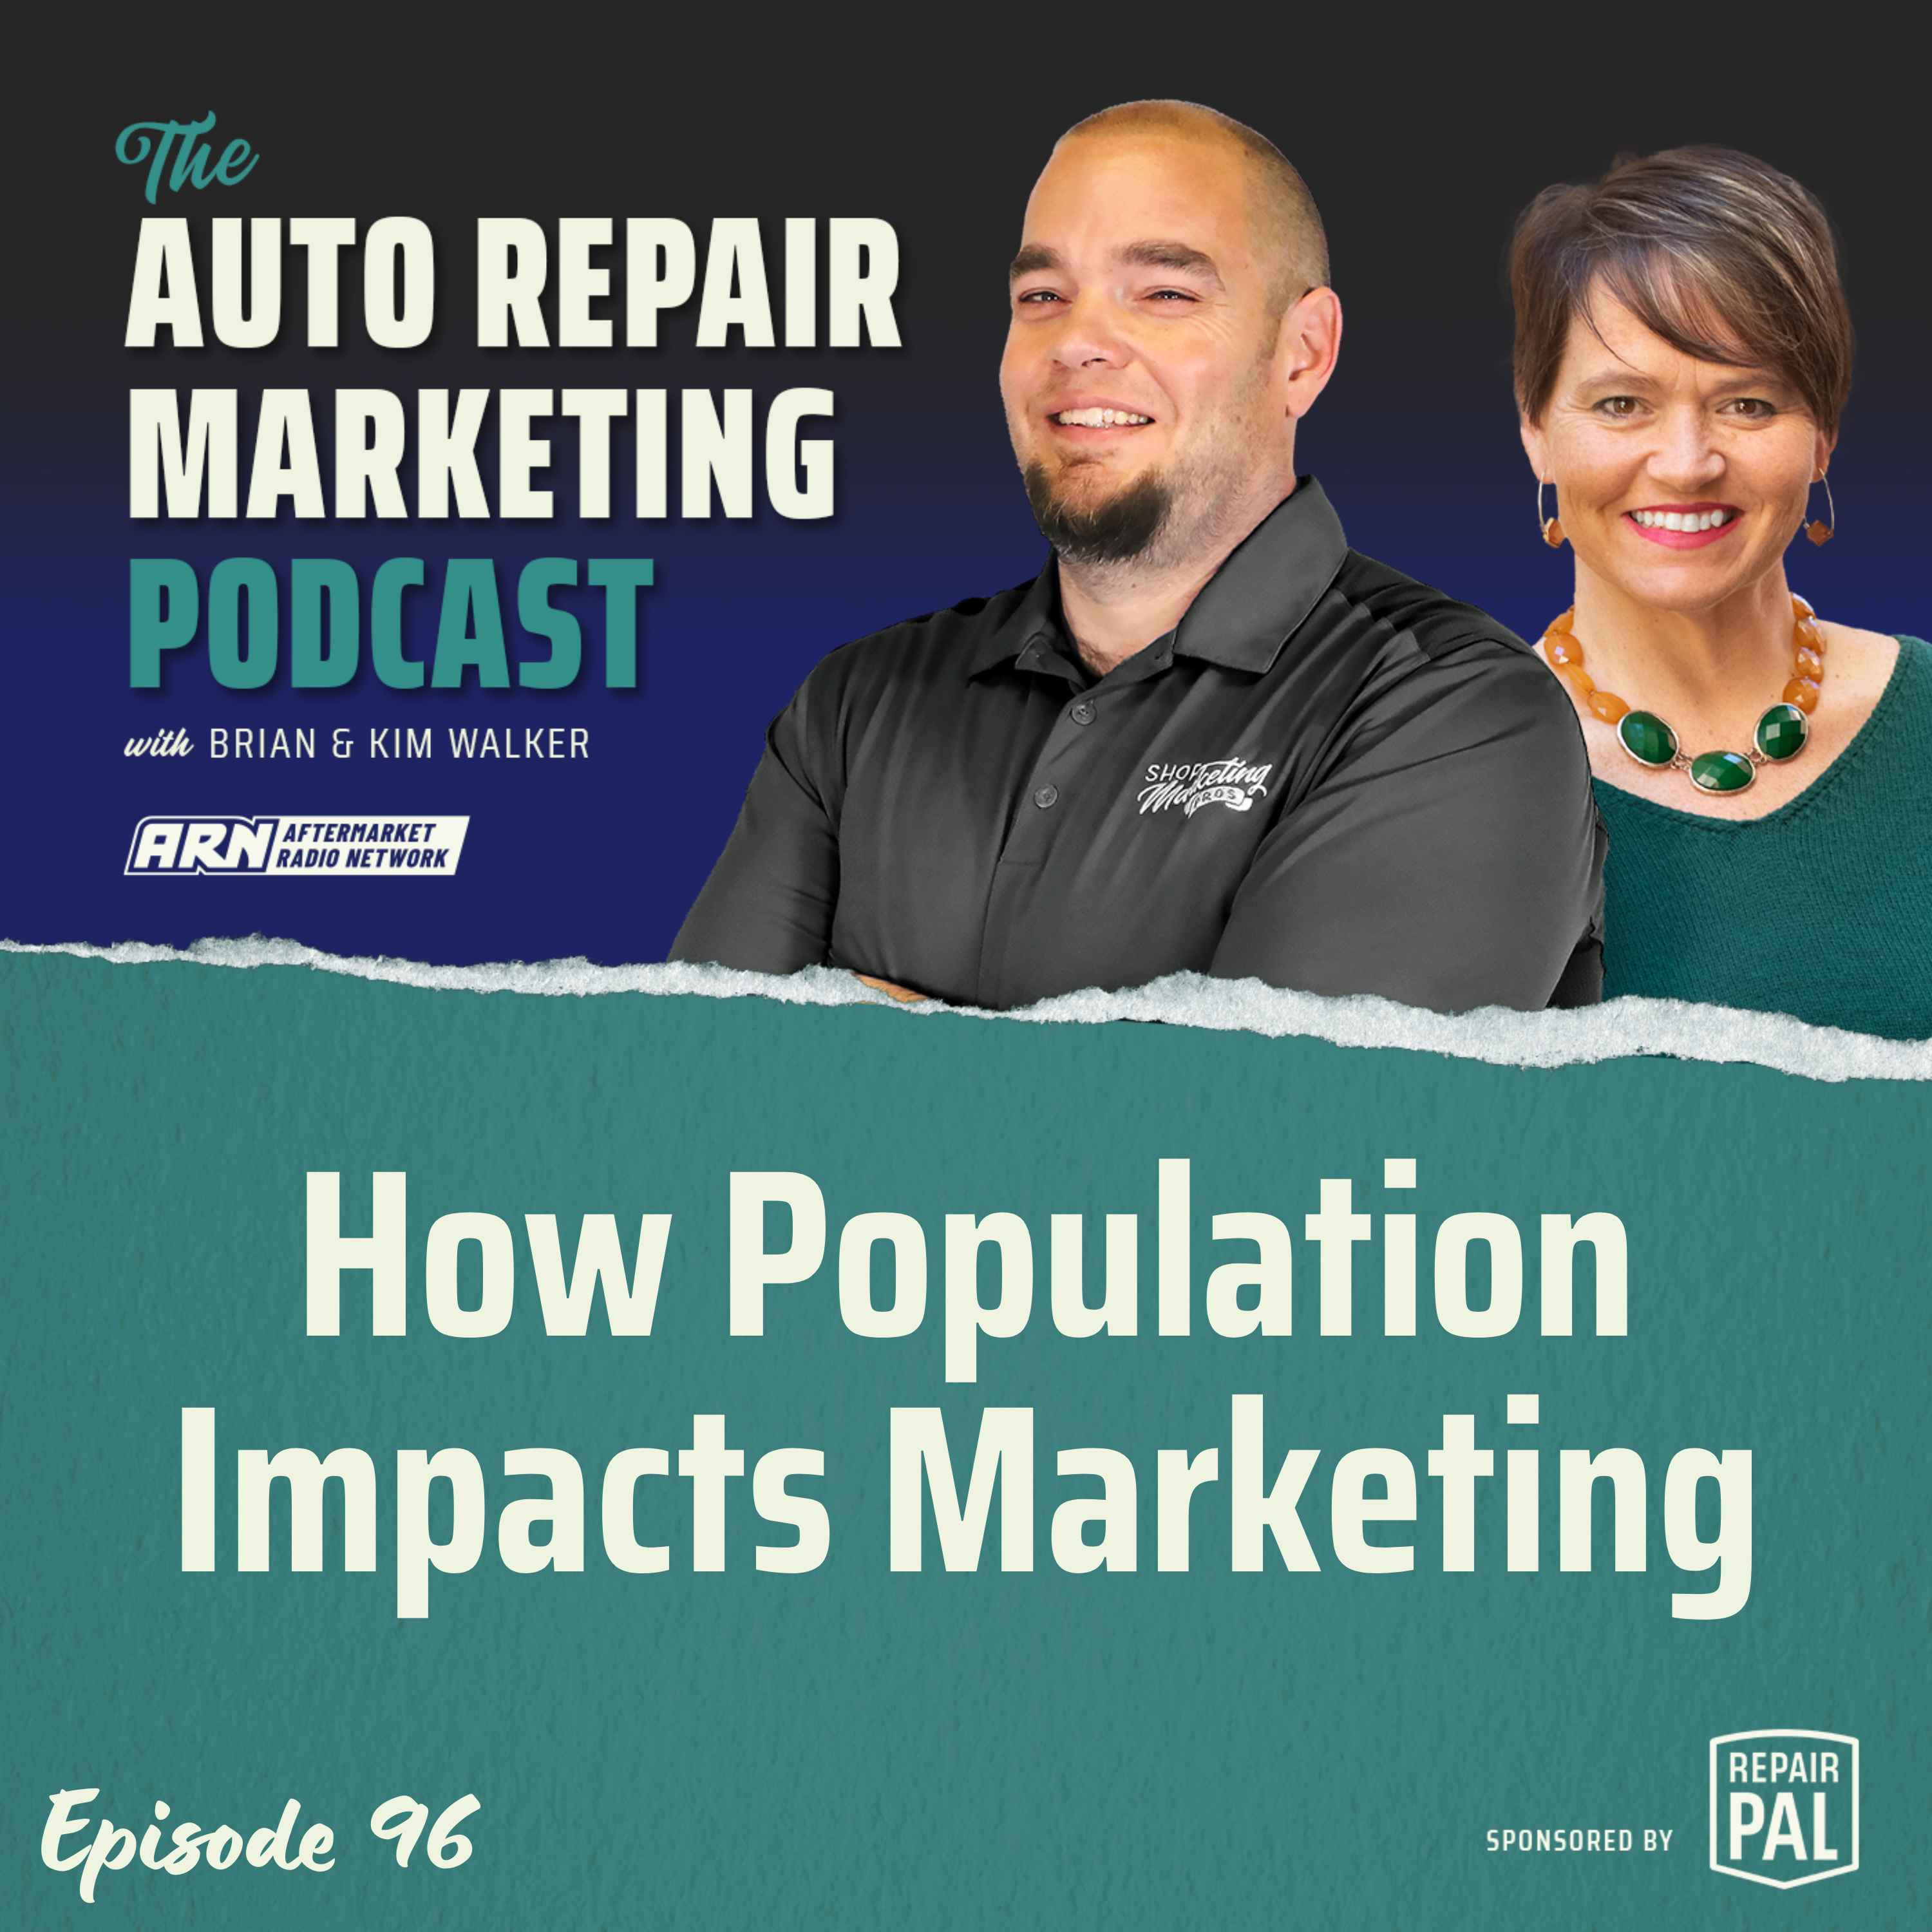 How Population Impacts Marketing [E1096] - The Auto Repair Marketing Podcast